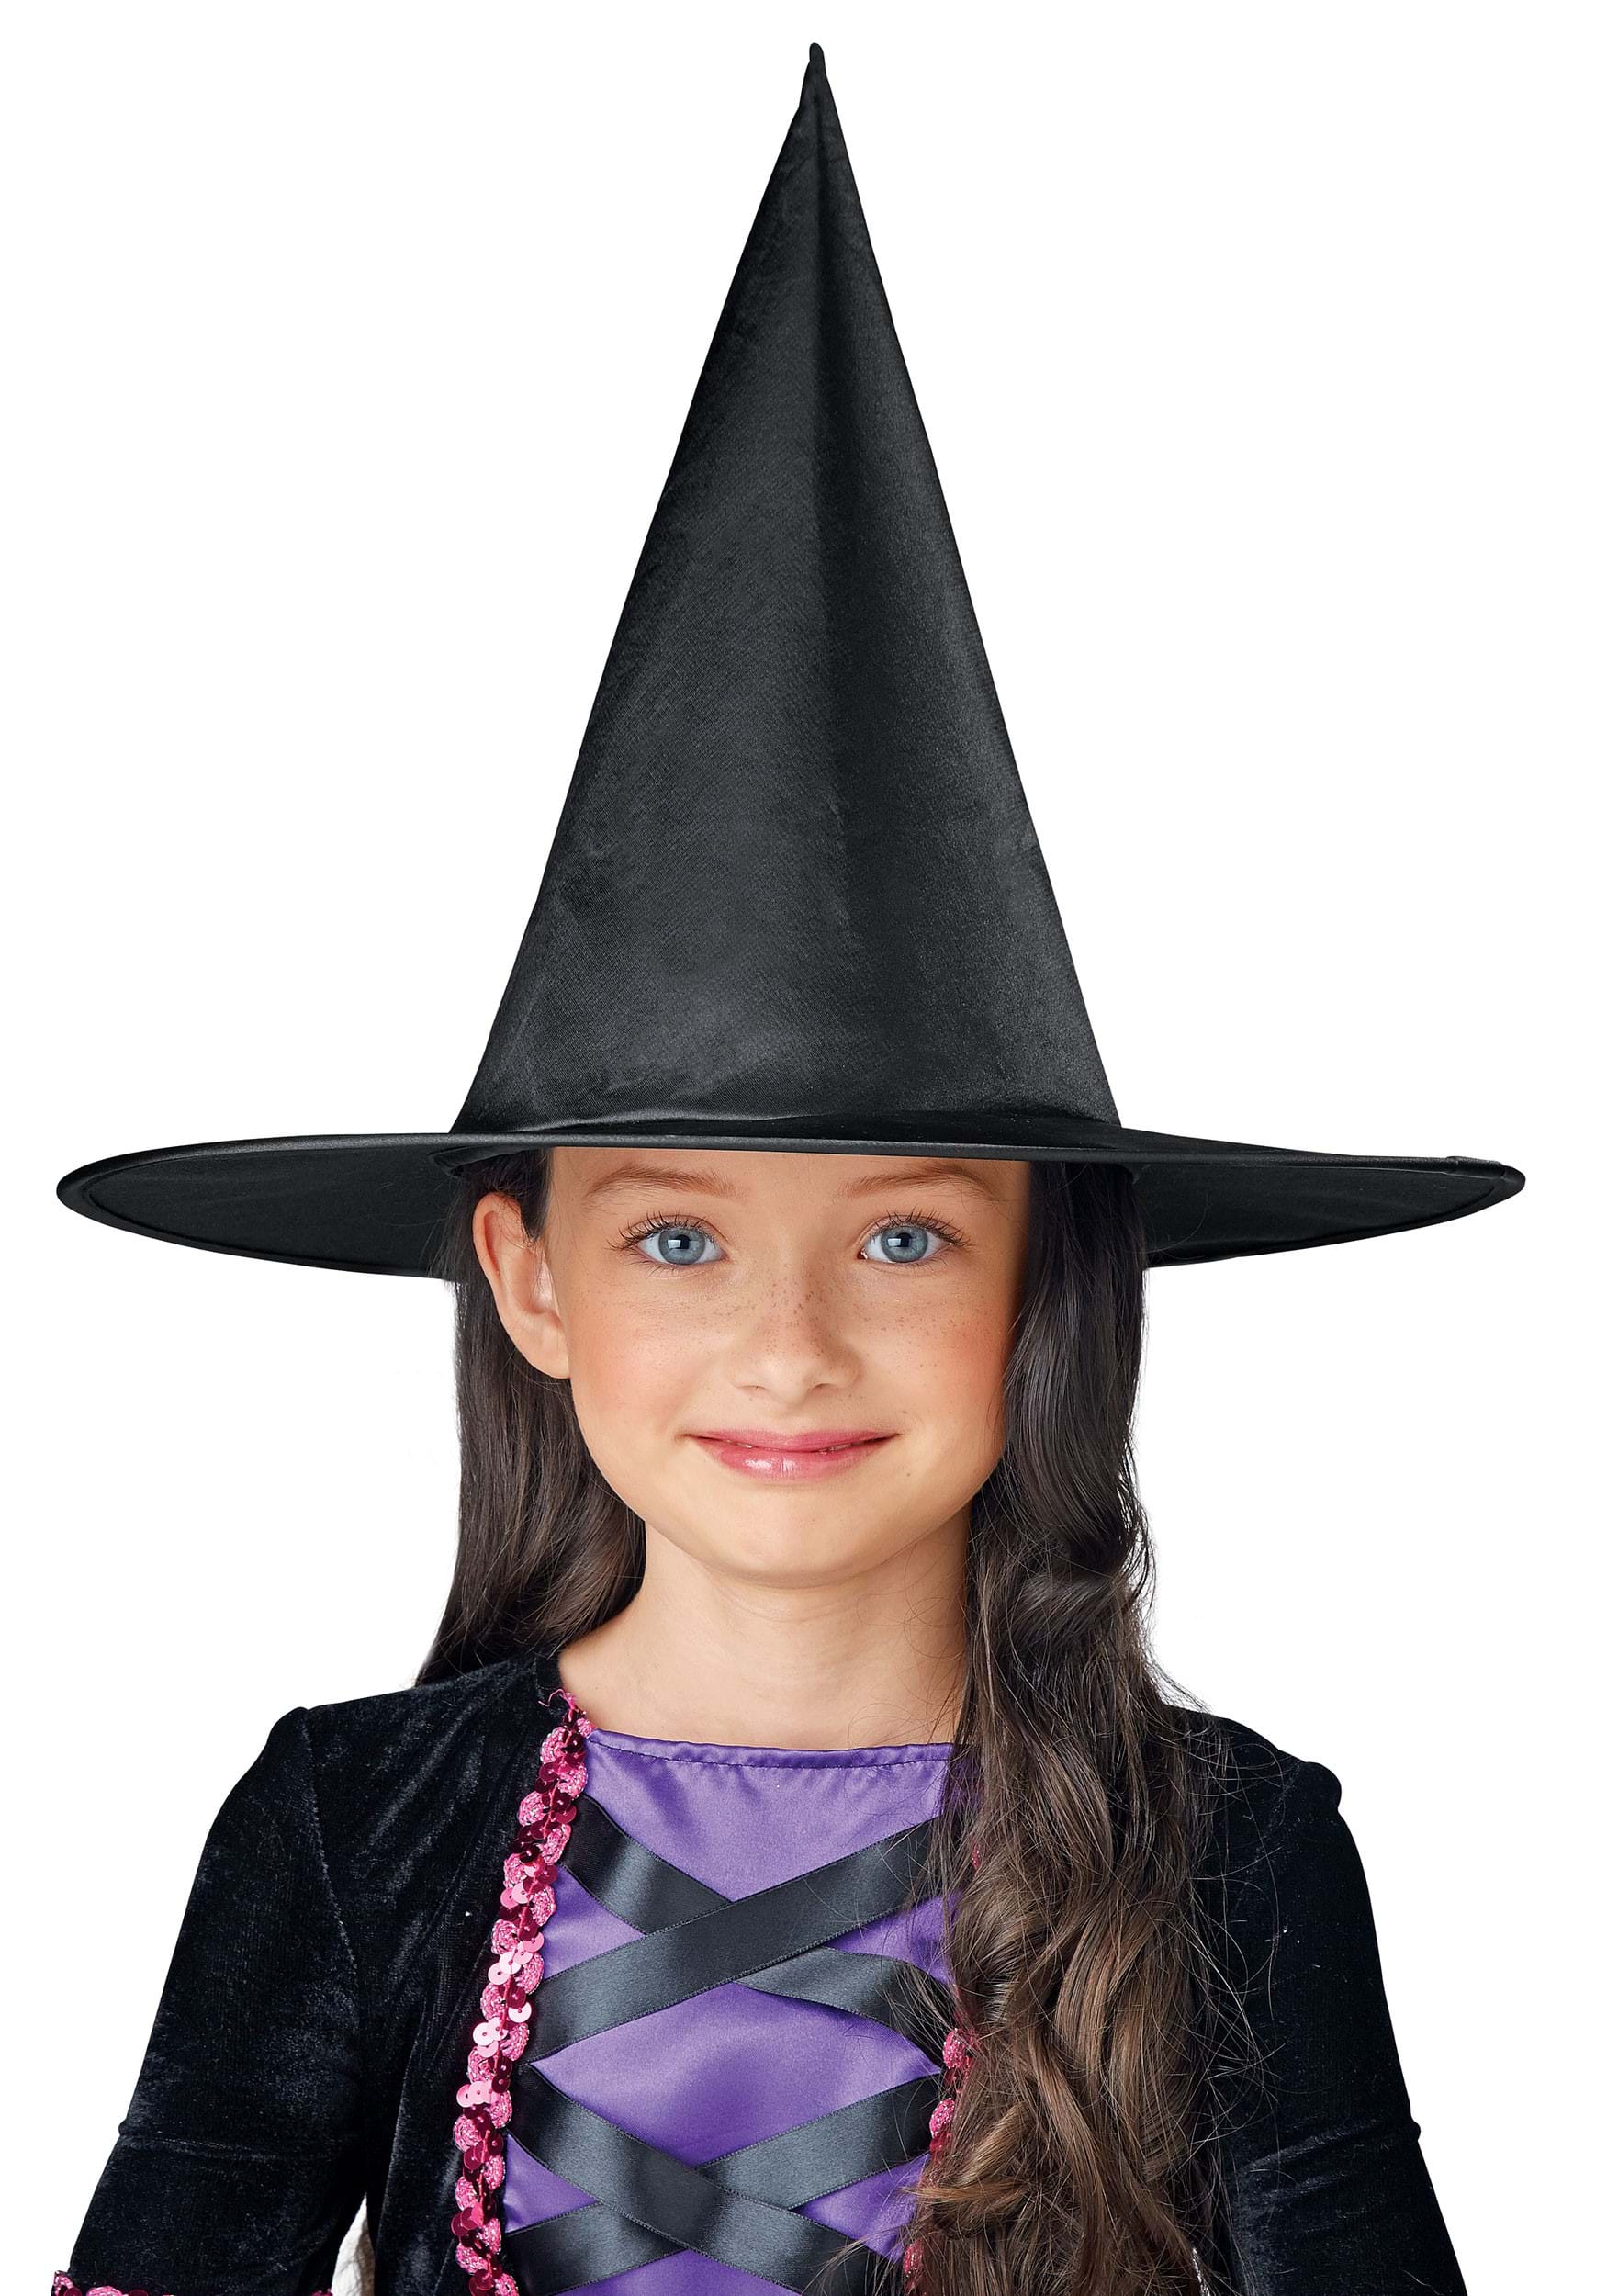 Kid's Classic Black Witch Hat